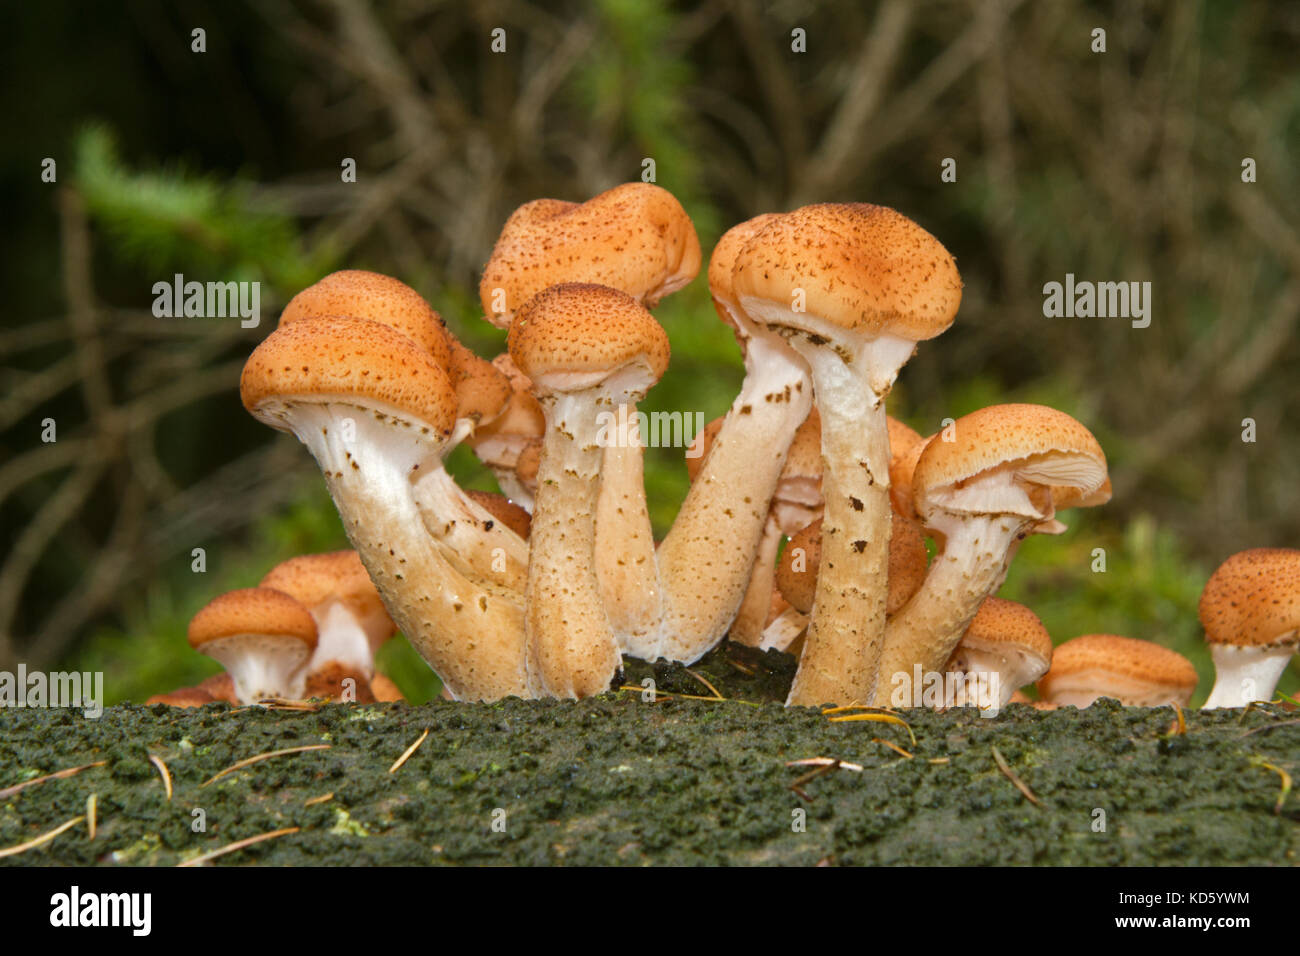 Freckled Dapperling mushrooms growing on a rotting tree stem Stock Photo